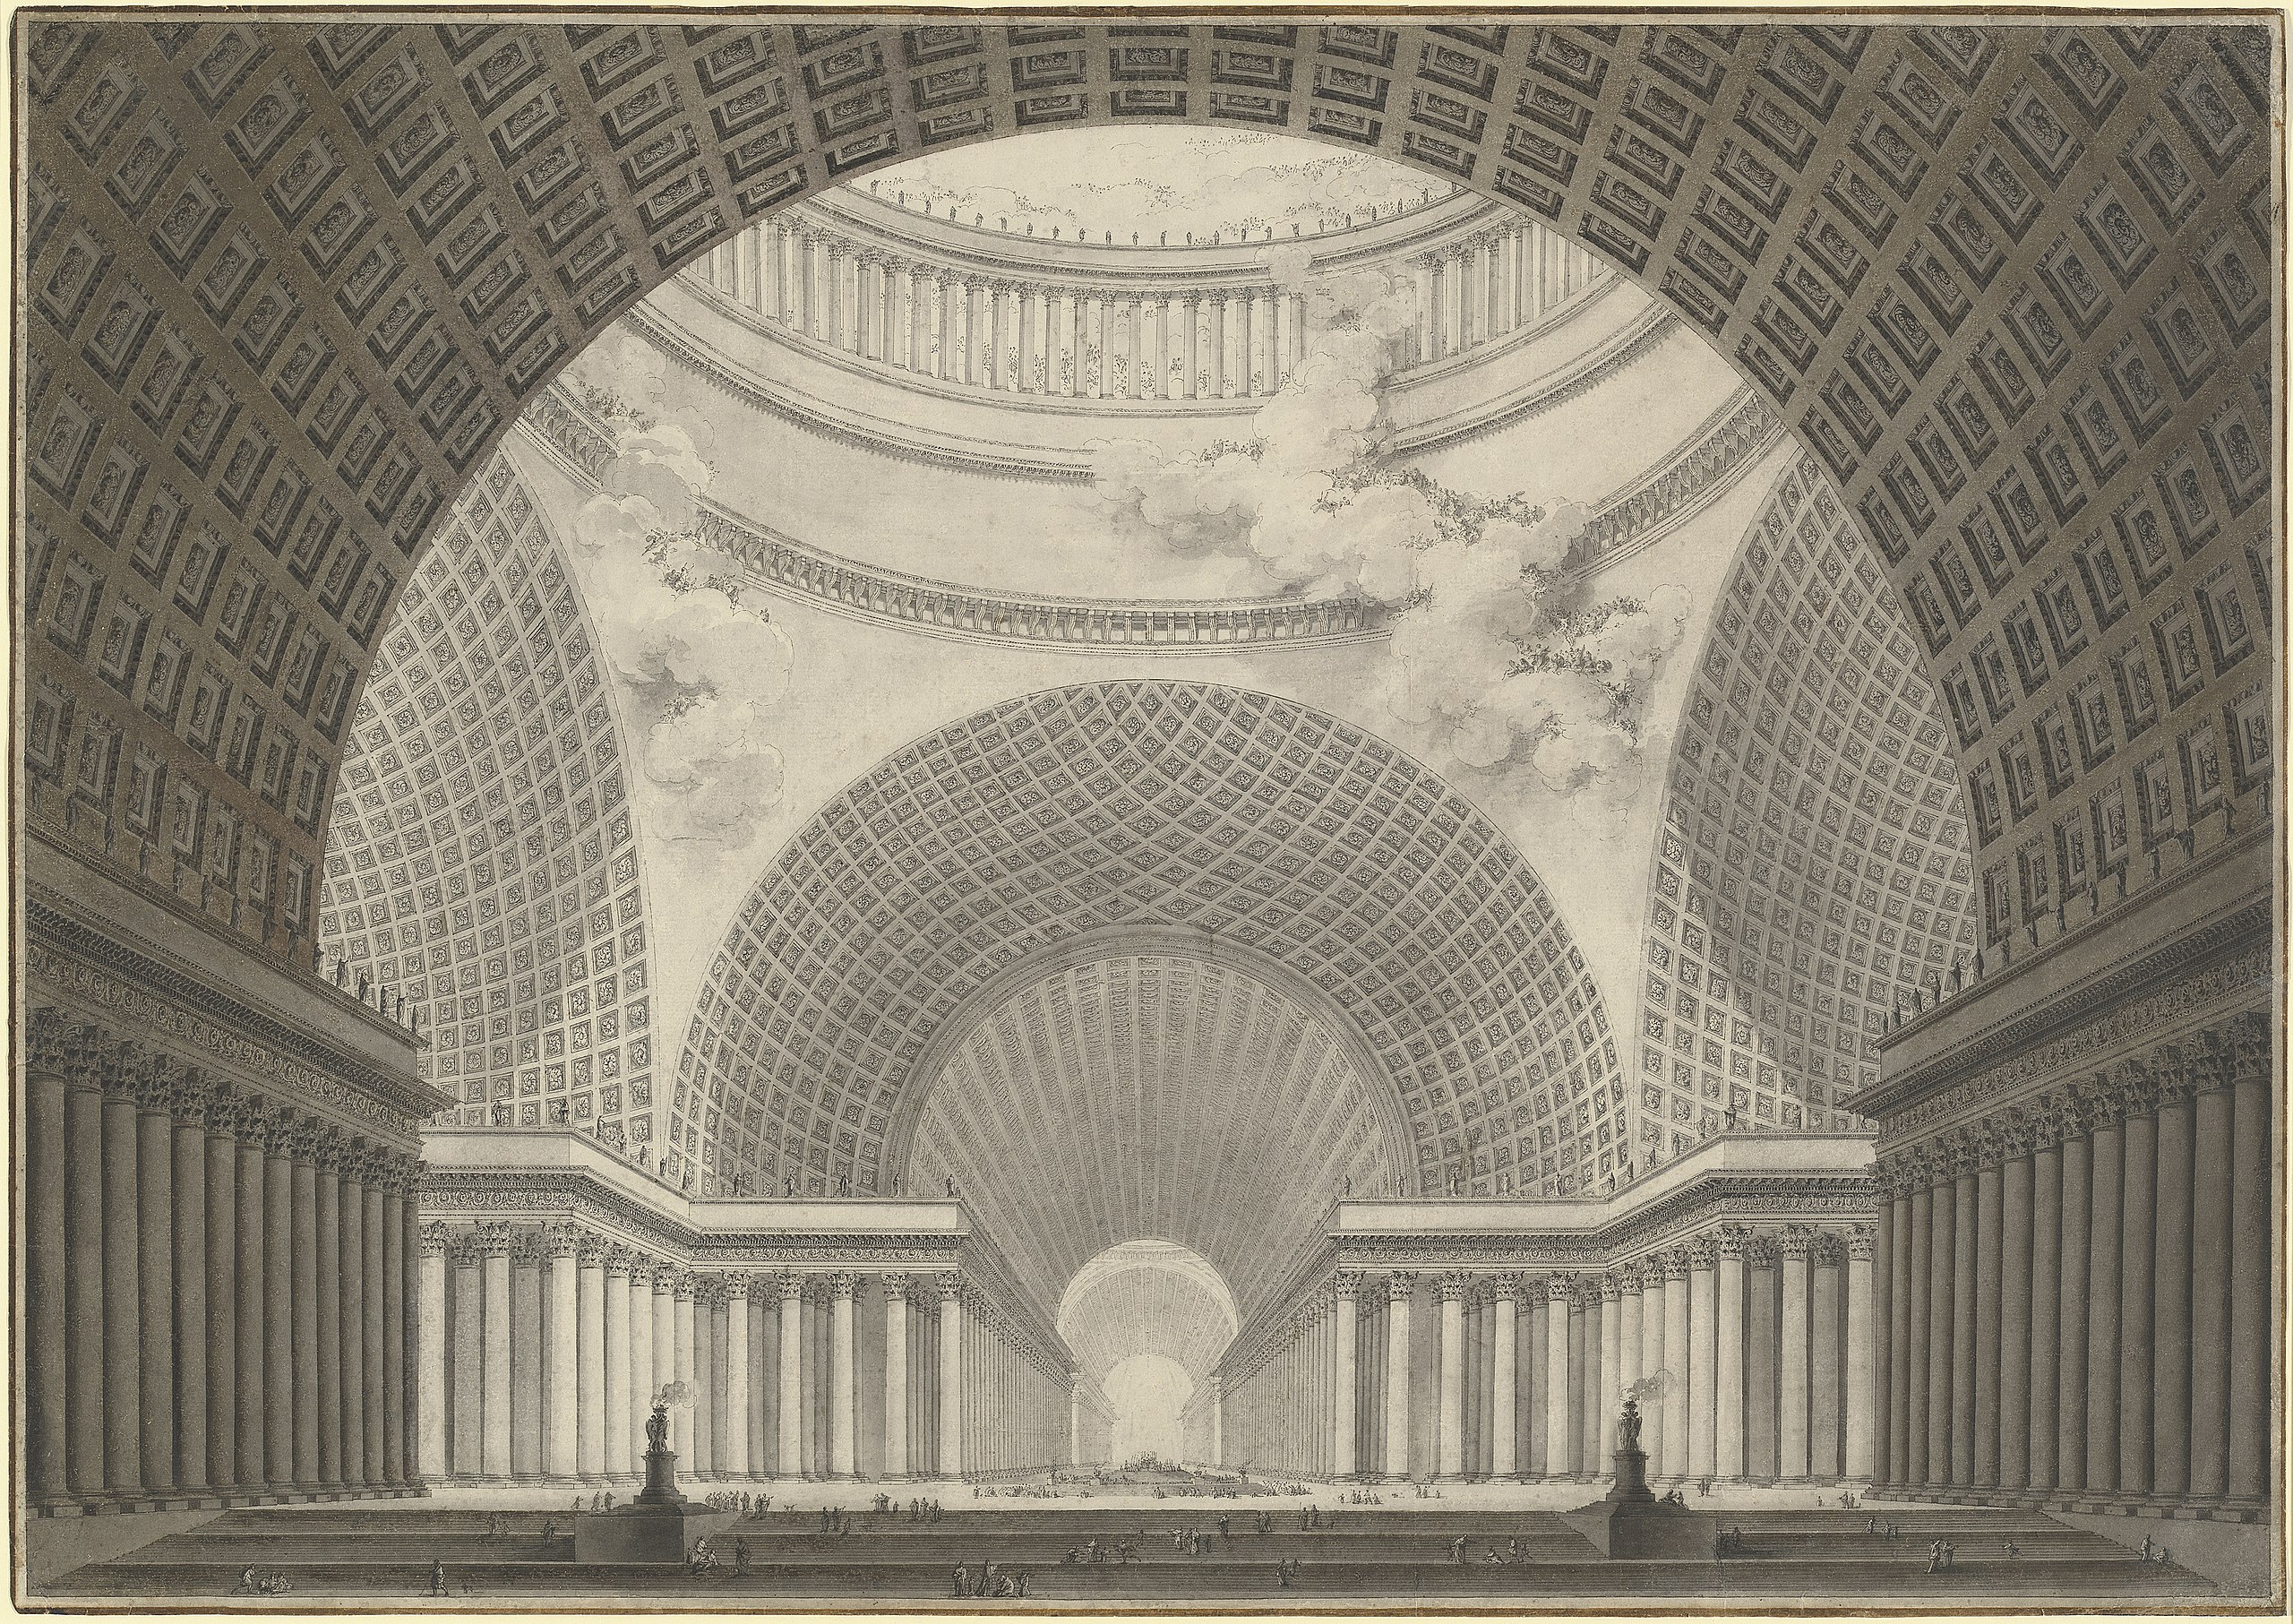 Boullée’s design for a church. (Credit: National Gallery of Art / Wikipedia)